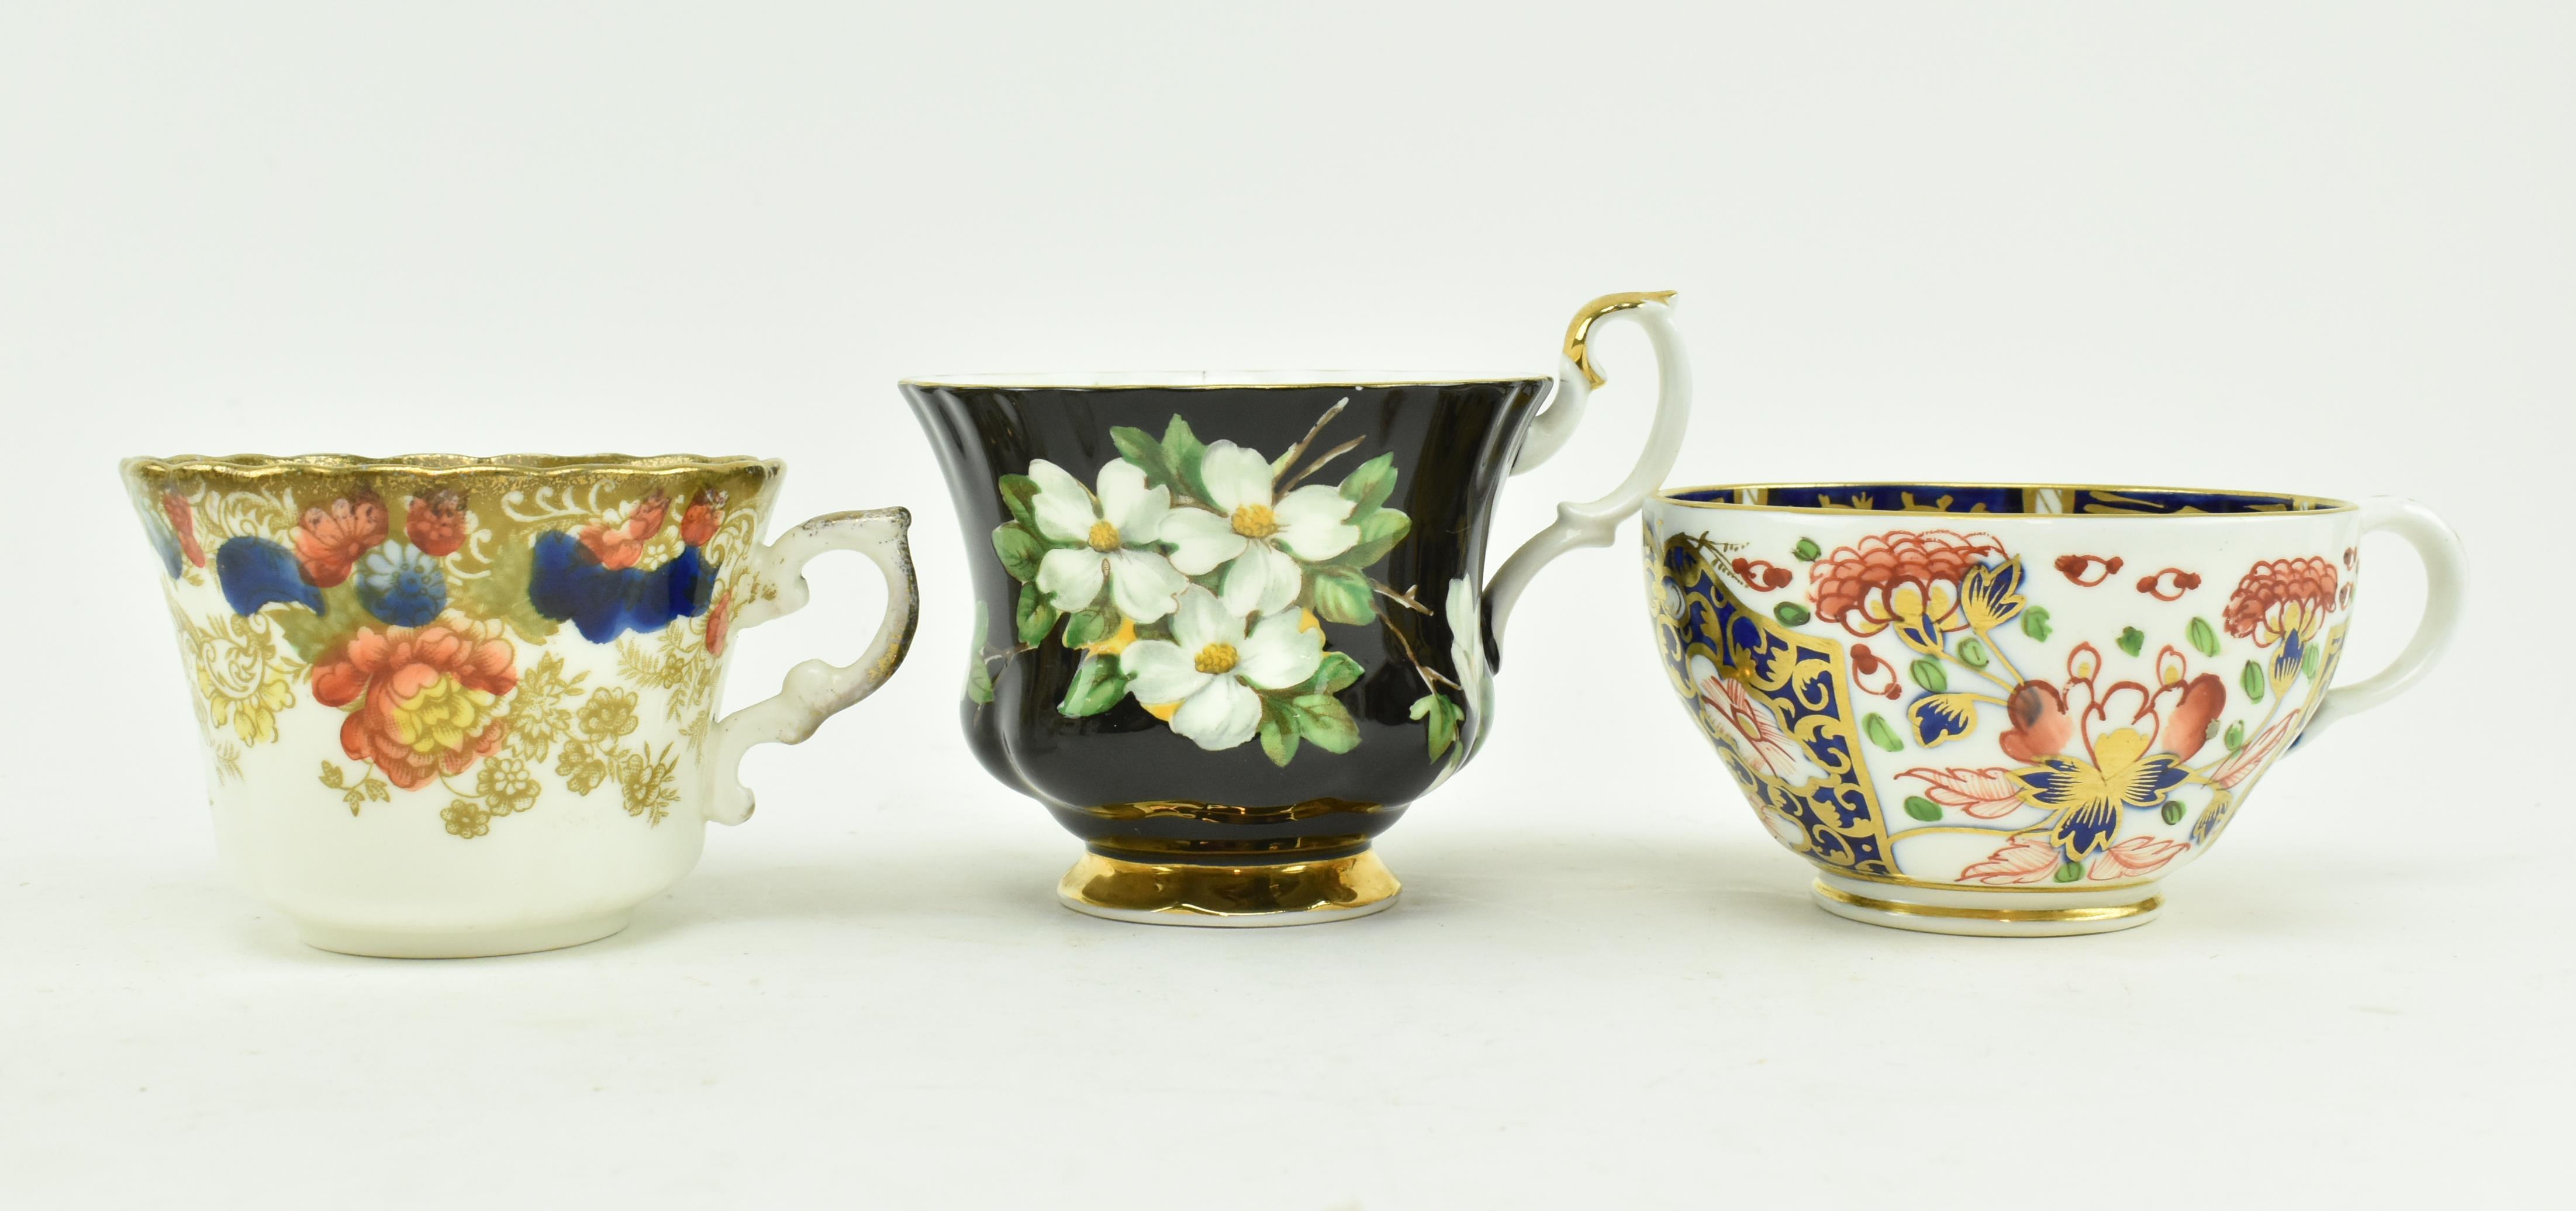 COLLECTION OF 19TH CENTURY PORCELAIN TEACUPS & SAUCERS - Image 11 of 13